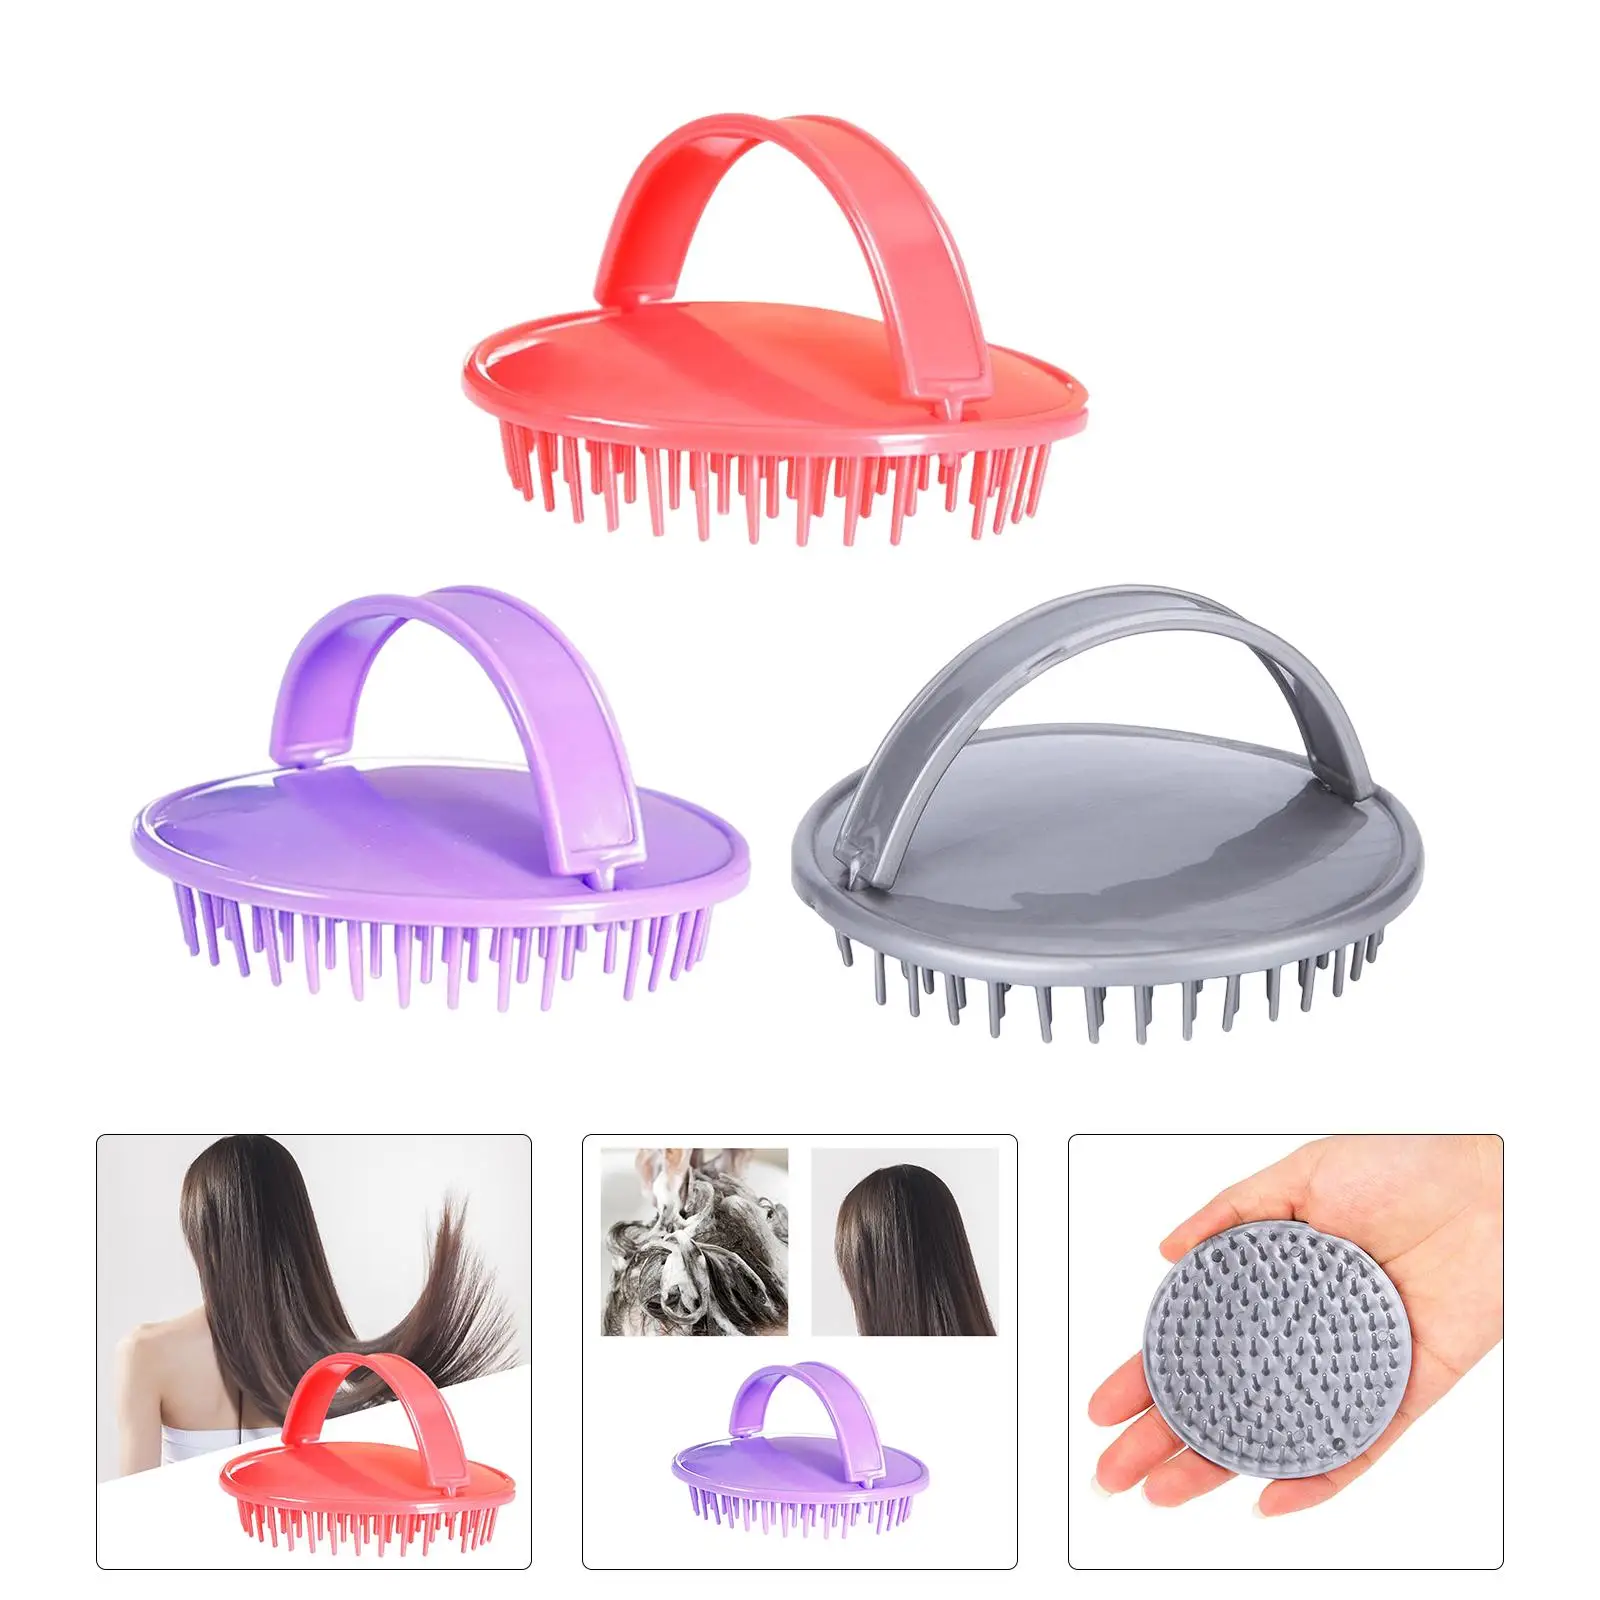 Scalp Massager Shampoo Brush Disentangling Kids Pets for Promote Hair Growth